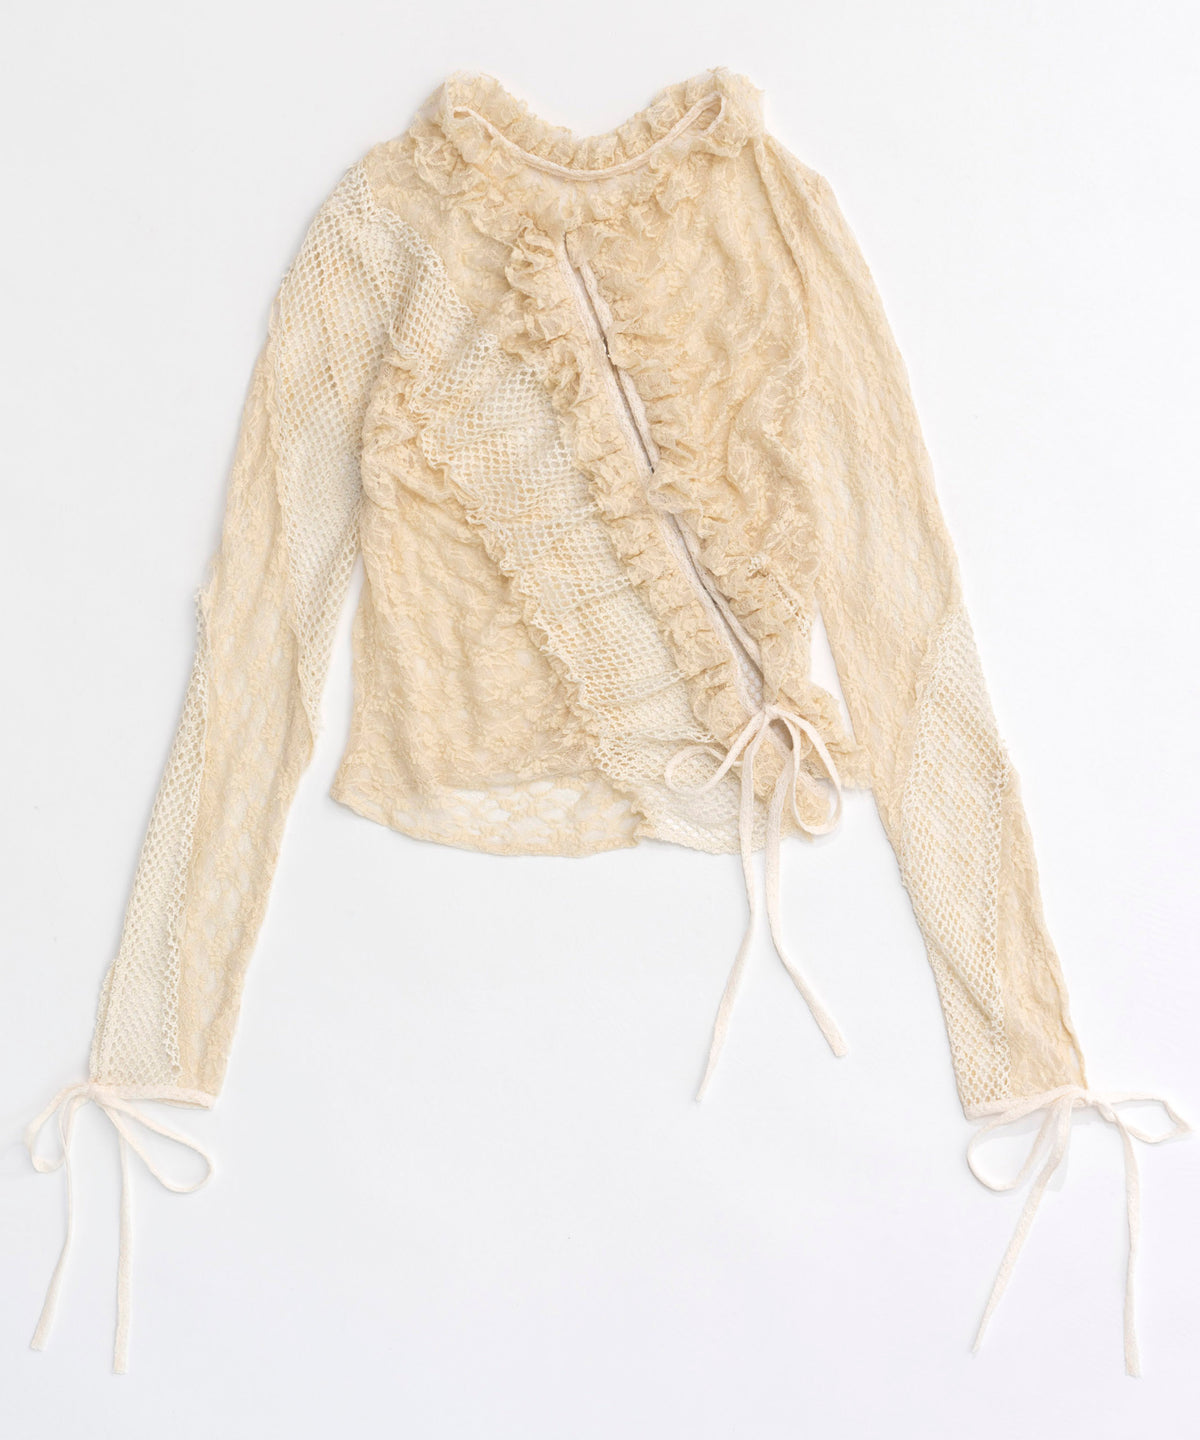 【24AUTUMN PRE-ORDER】Lace Docking Frill Cardigan